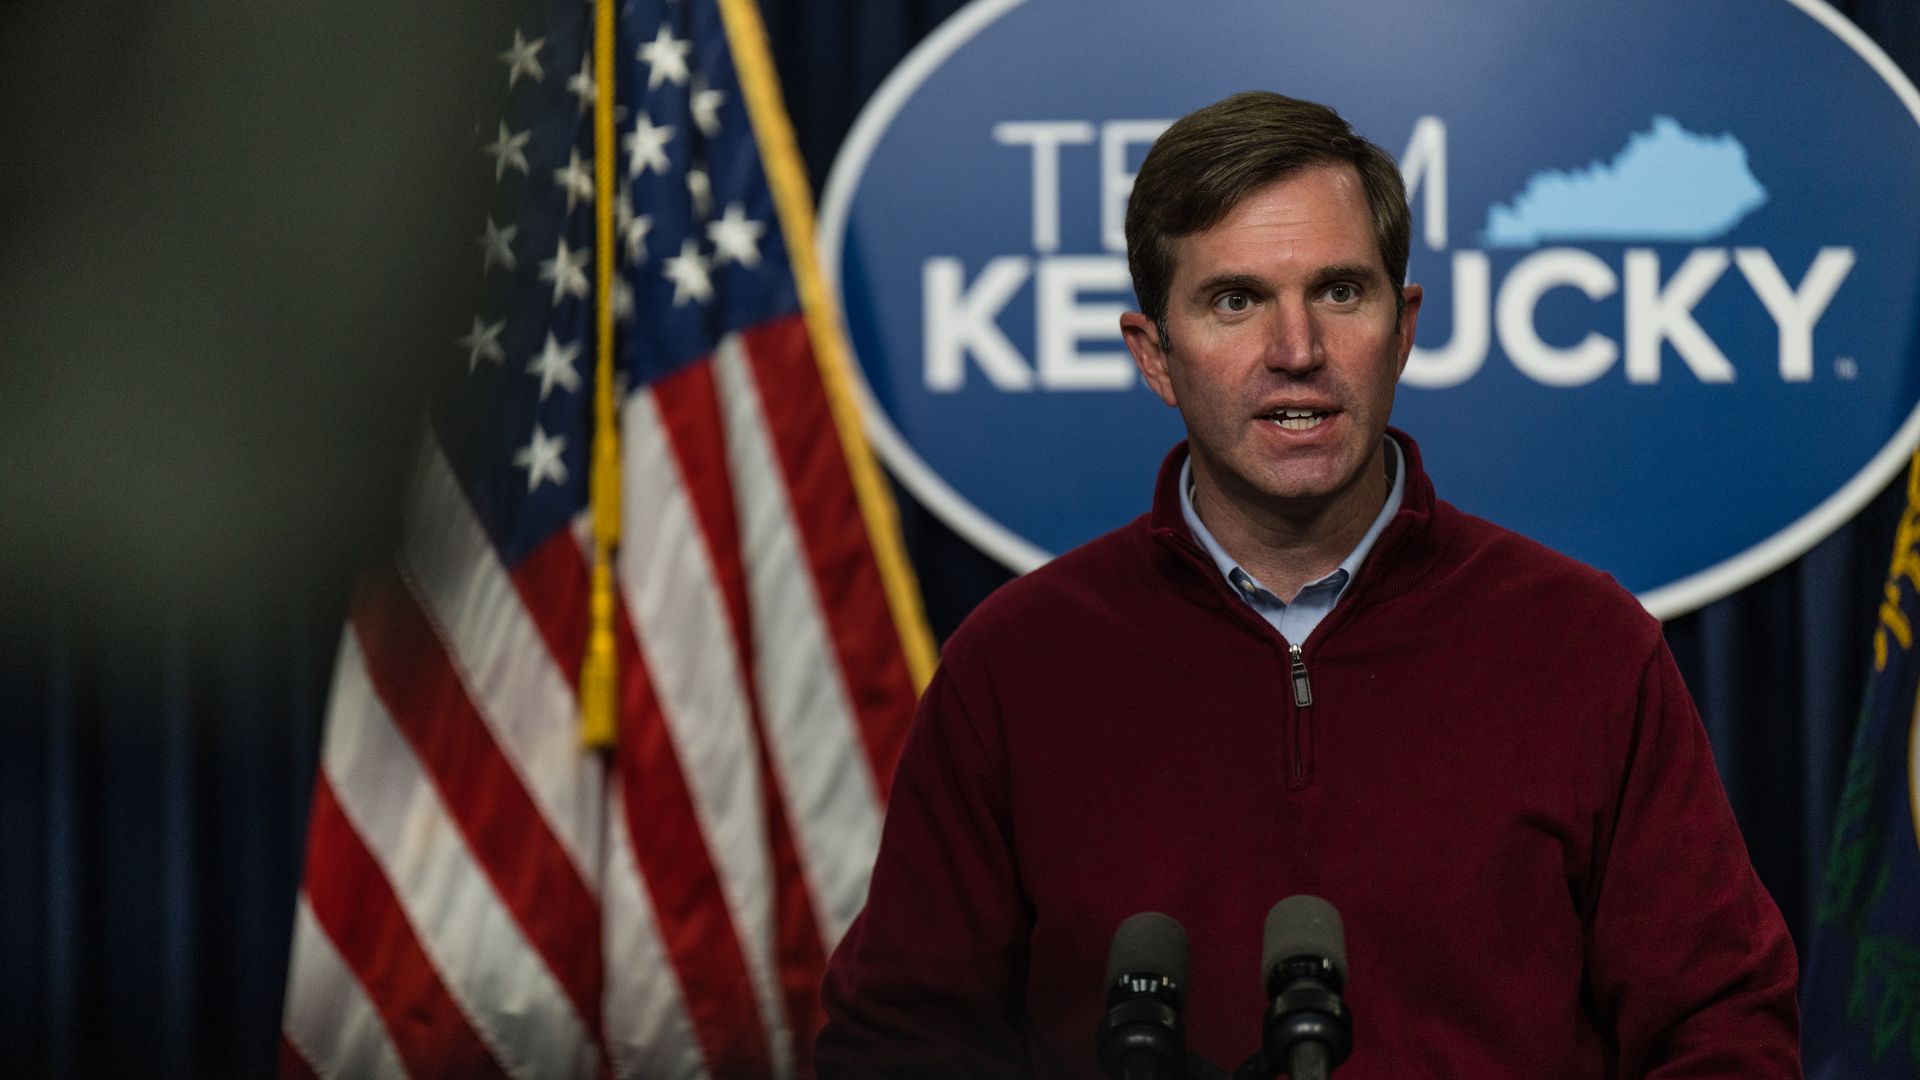 Photo of Andy Beshear speaking from a podium in front of a Team Kentucky sign